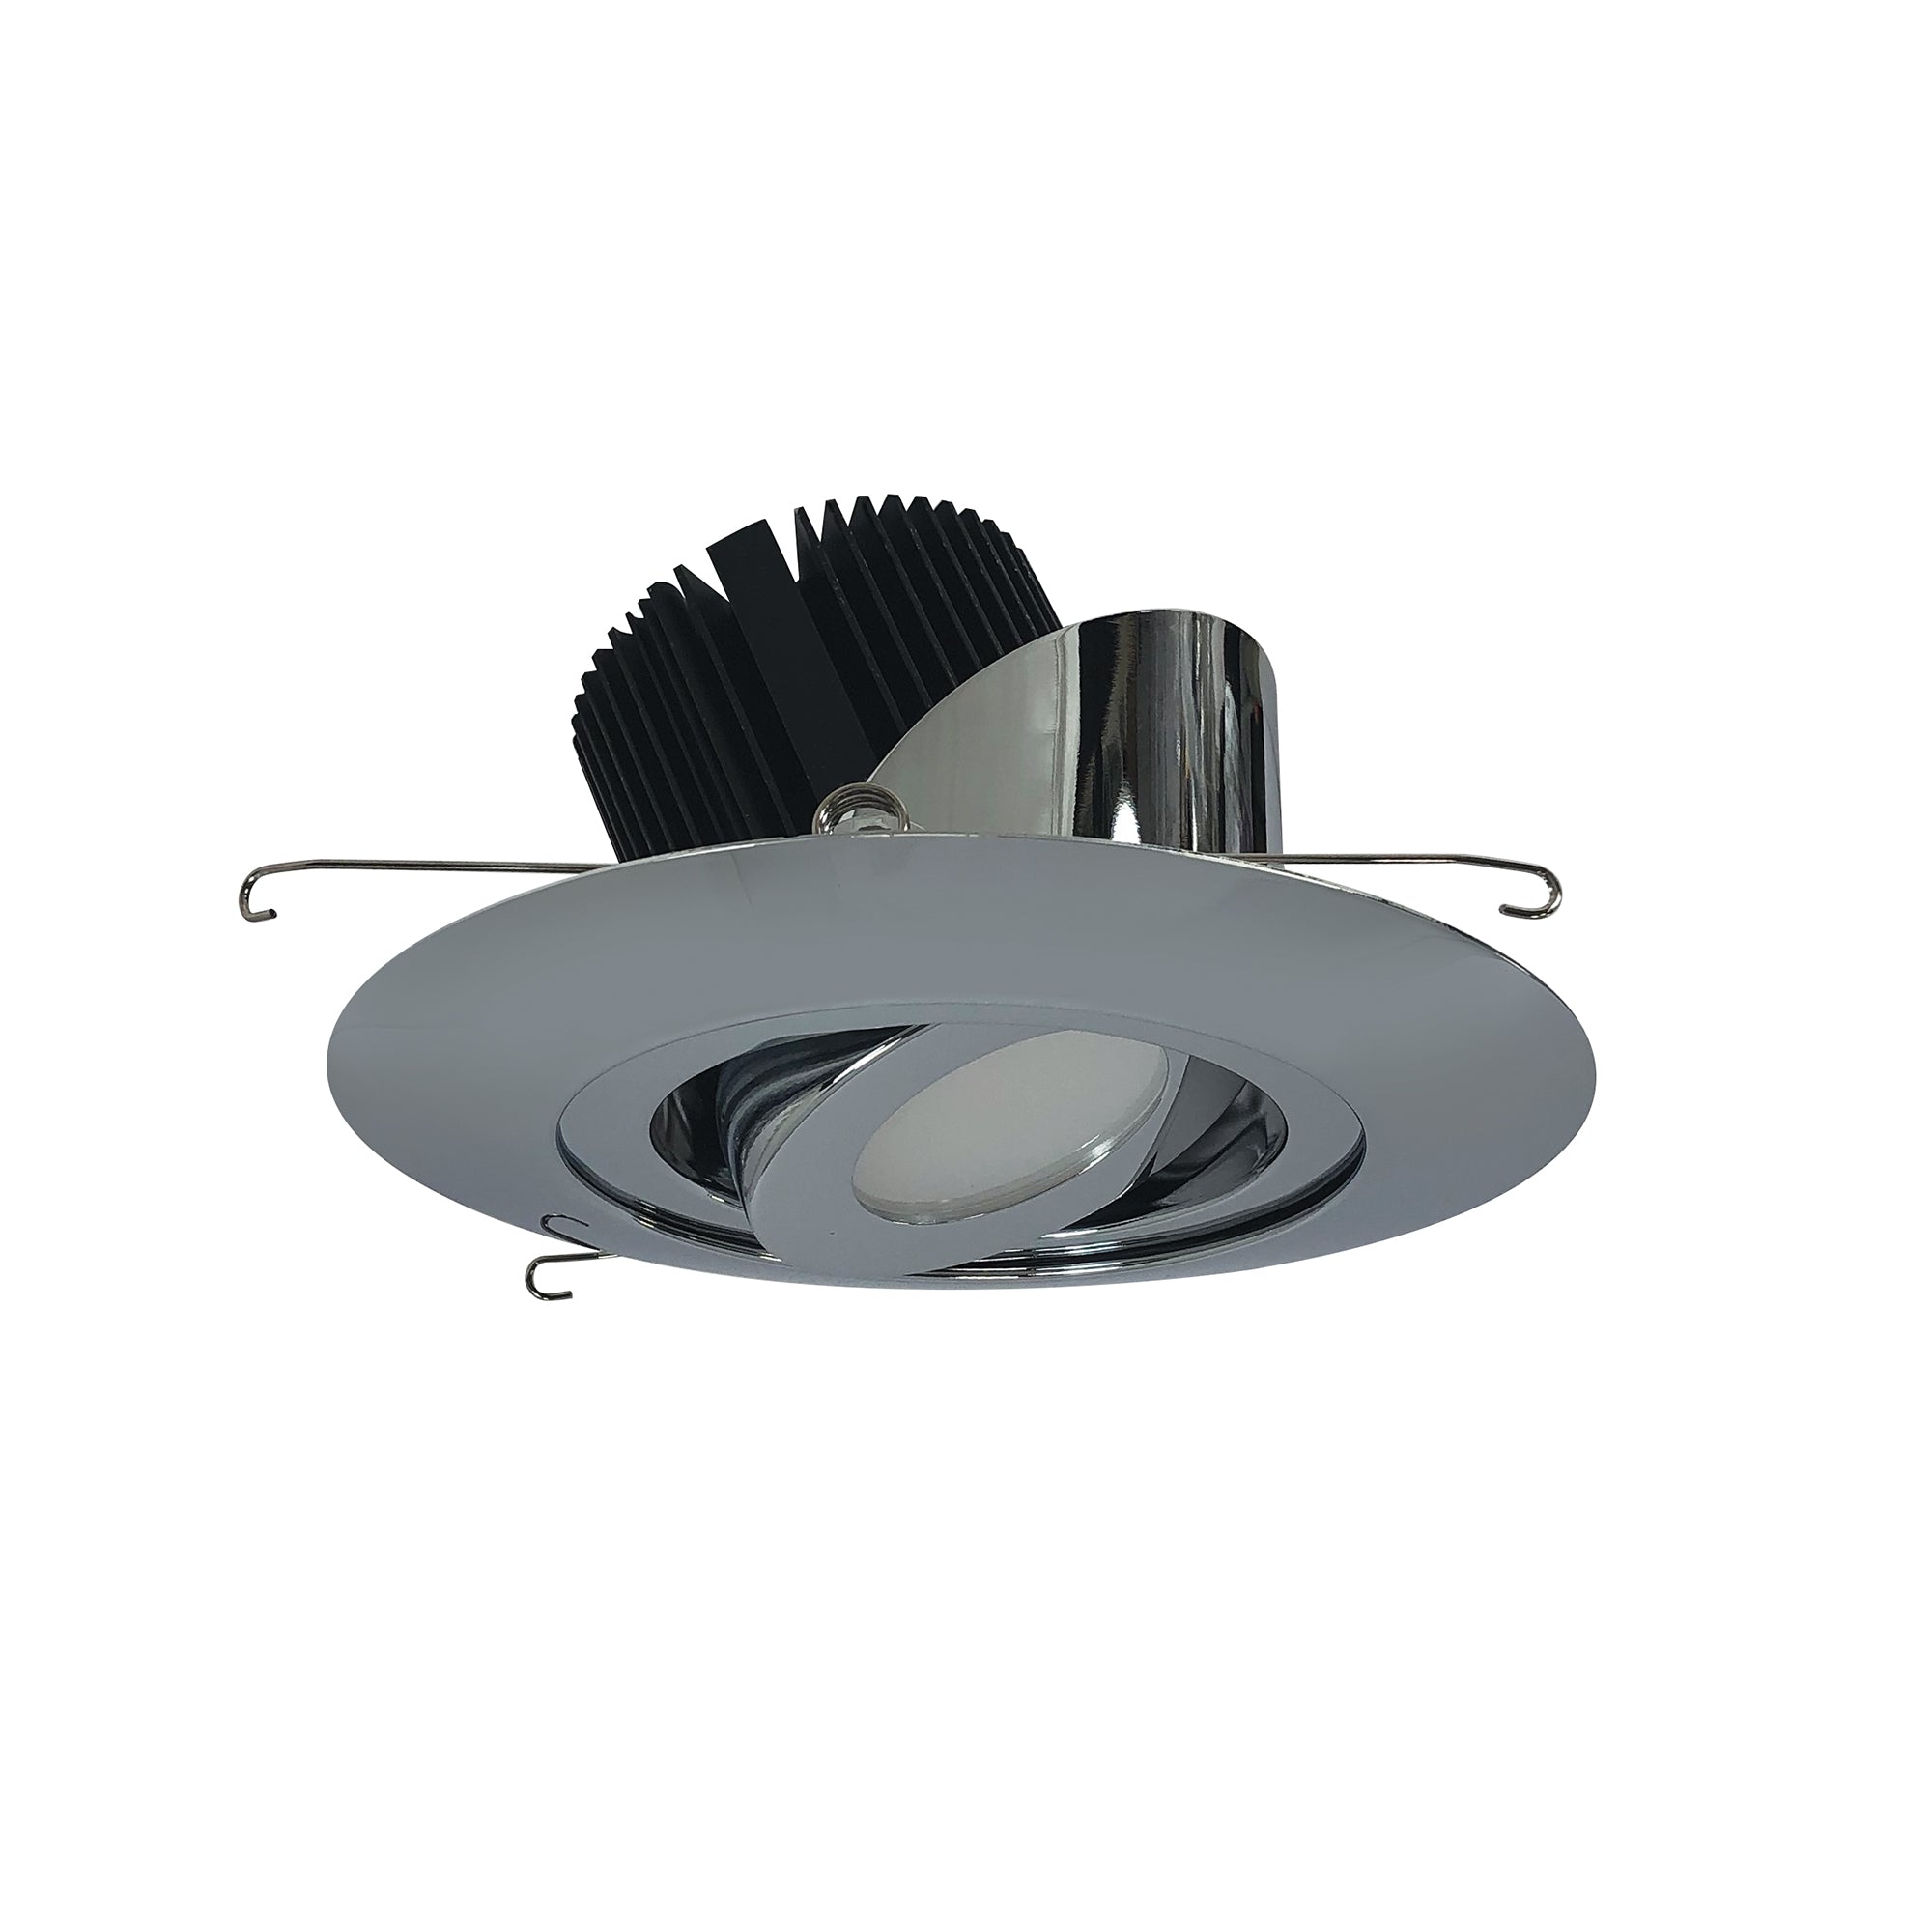 Nora Lighting NRM2-614L2530MC - Recessed - 6 Inch Marquise II Round Surface Adjustable Trim, Medium Flood, 2500lm, 3000K, Chrome (Not Compatible with NHRM2-625 Housings)